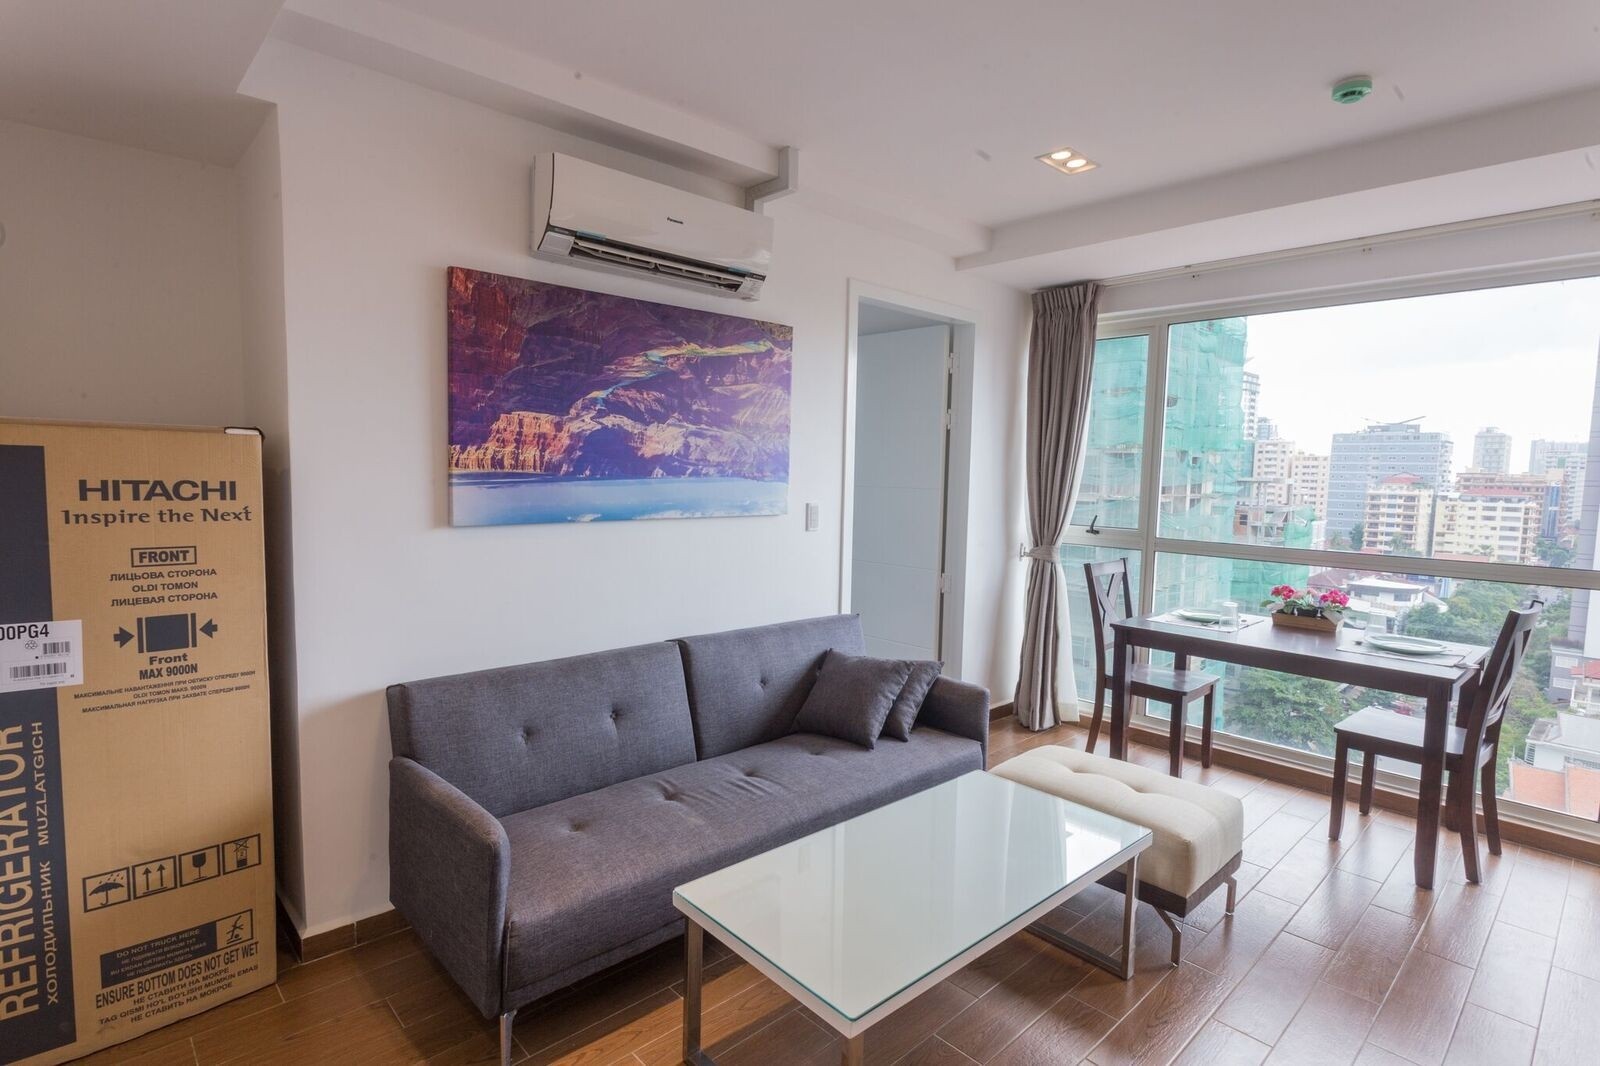 the living room of the 1-bedroom serviced apartment for rent in BKK1 in Phnom Penh